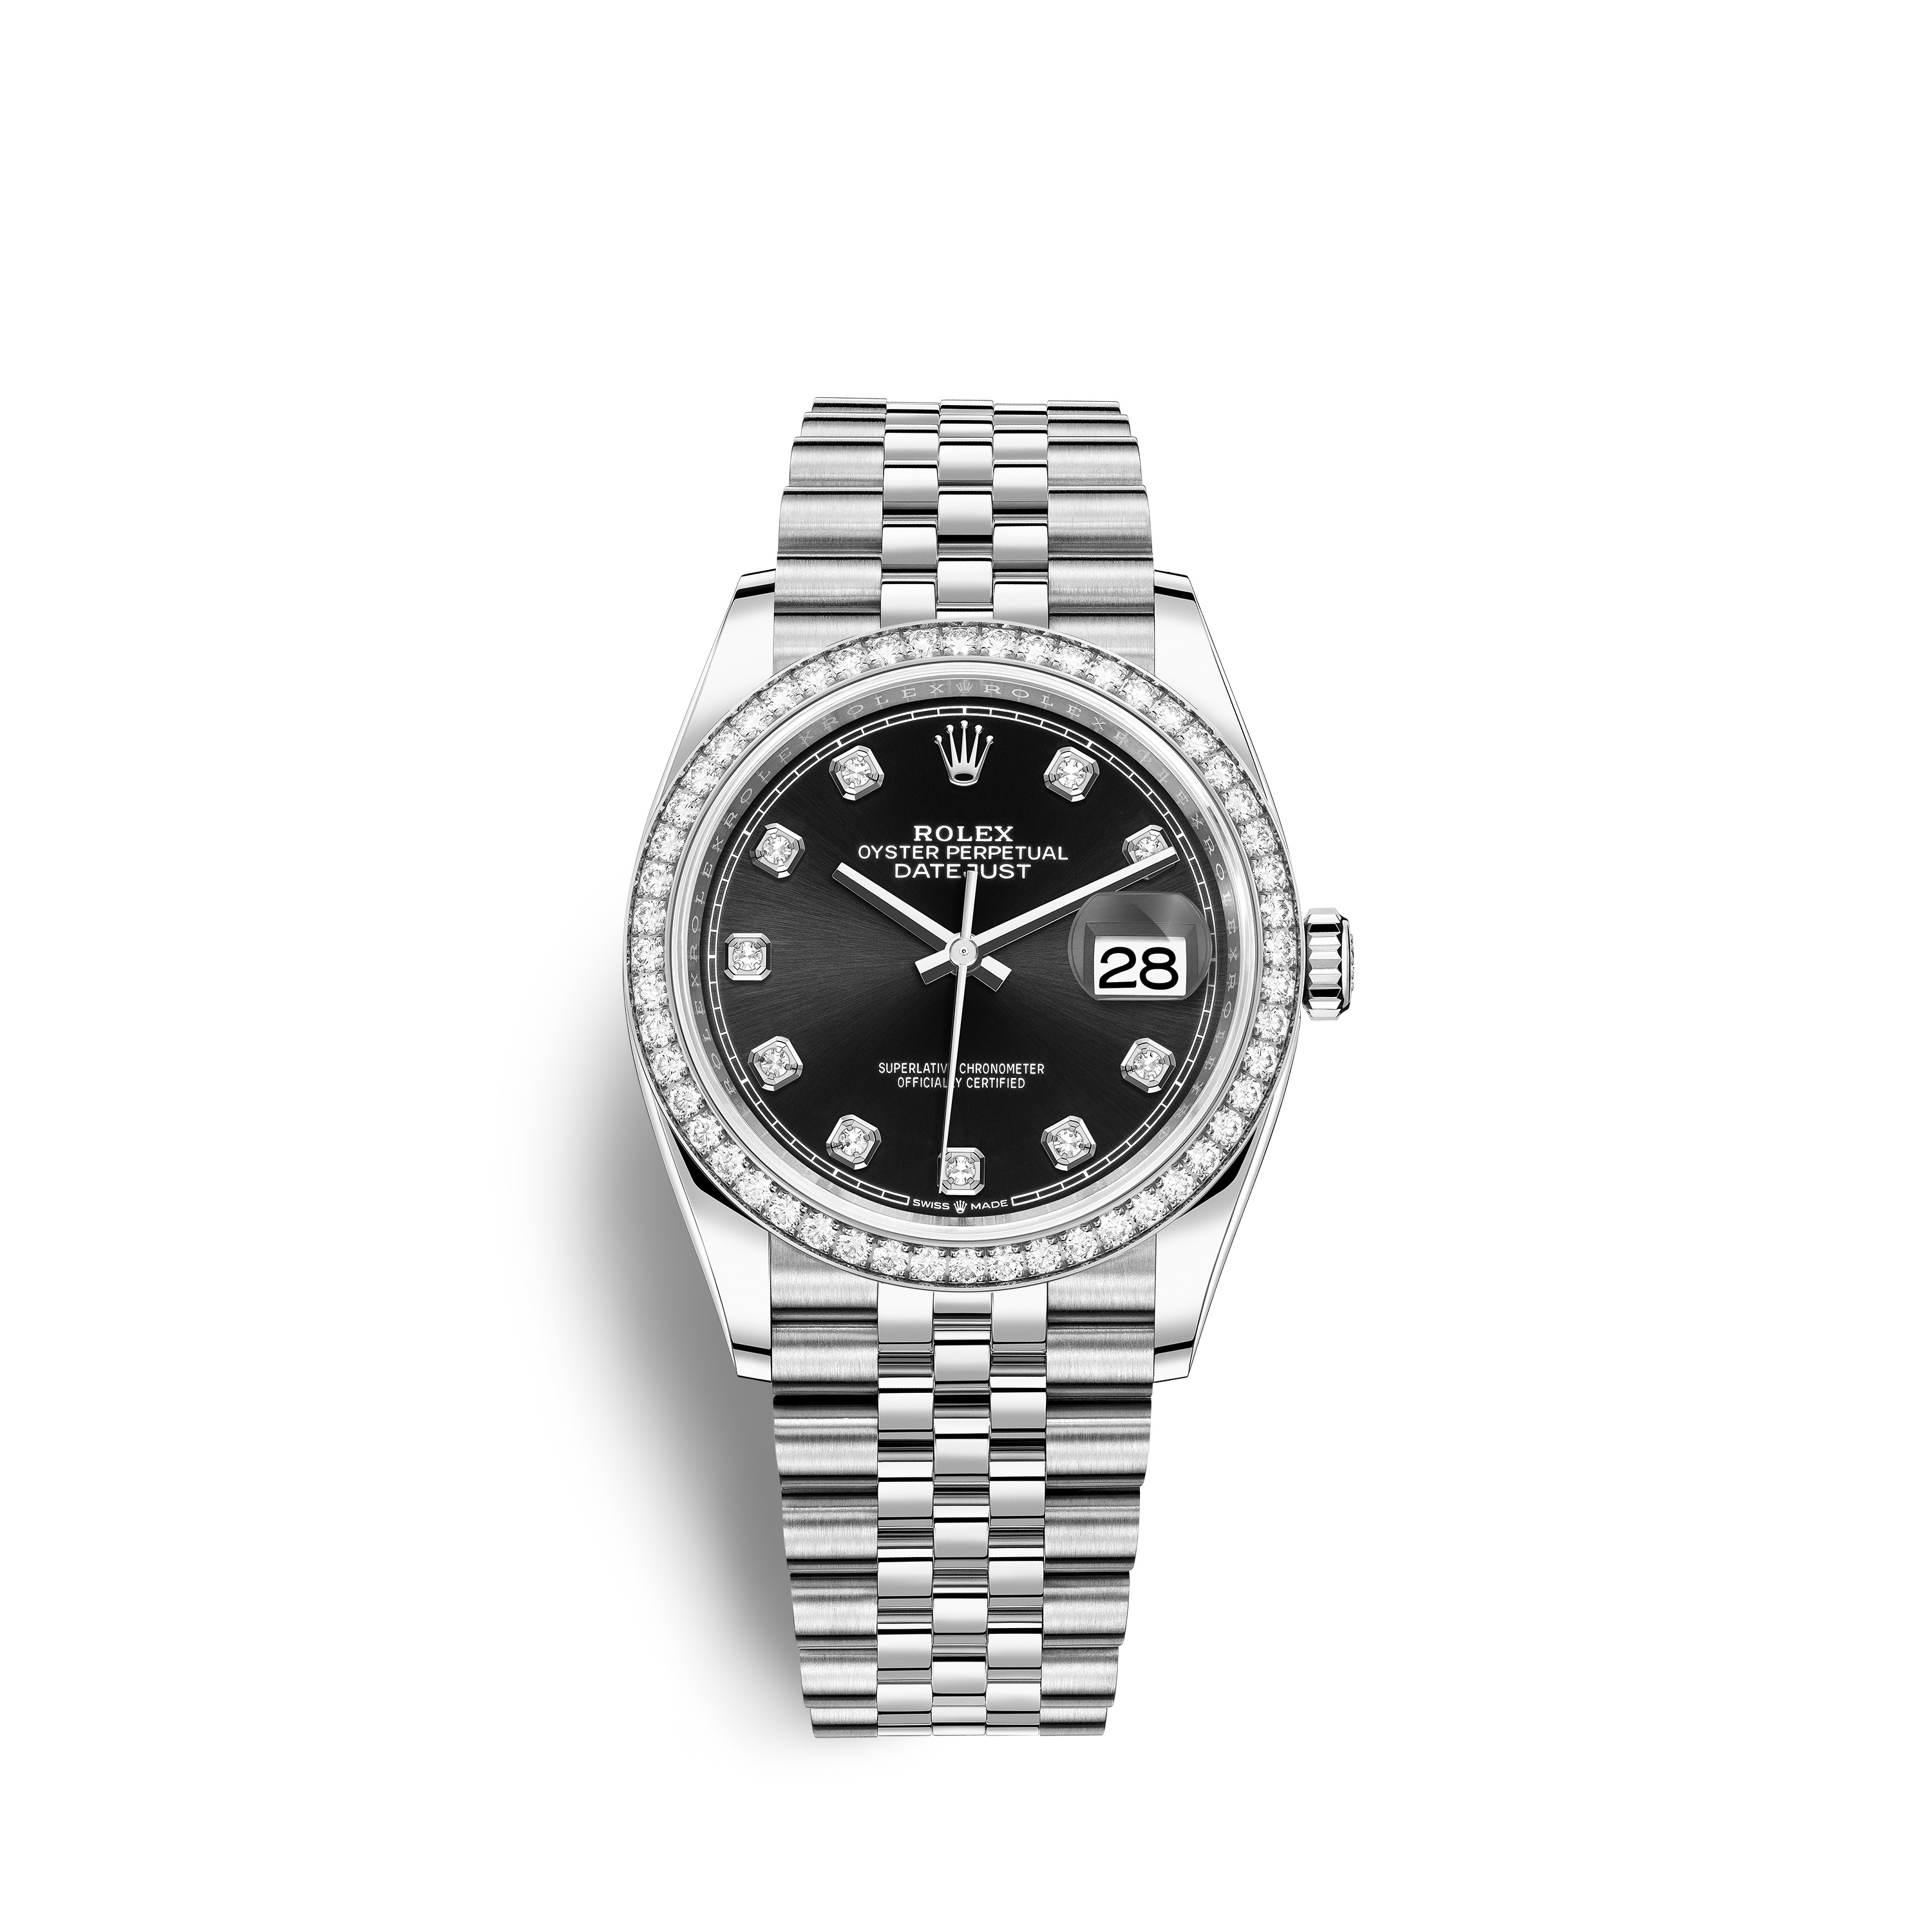 Datejust 36 126284RBR White Gold, Stainless Steel & Diamonds Watch (Black Set with Diamonds)